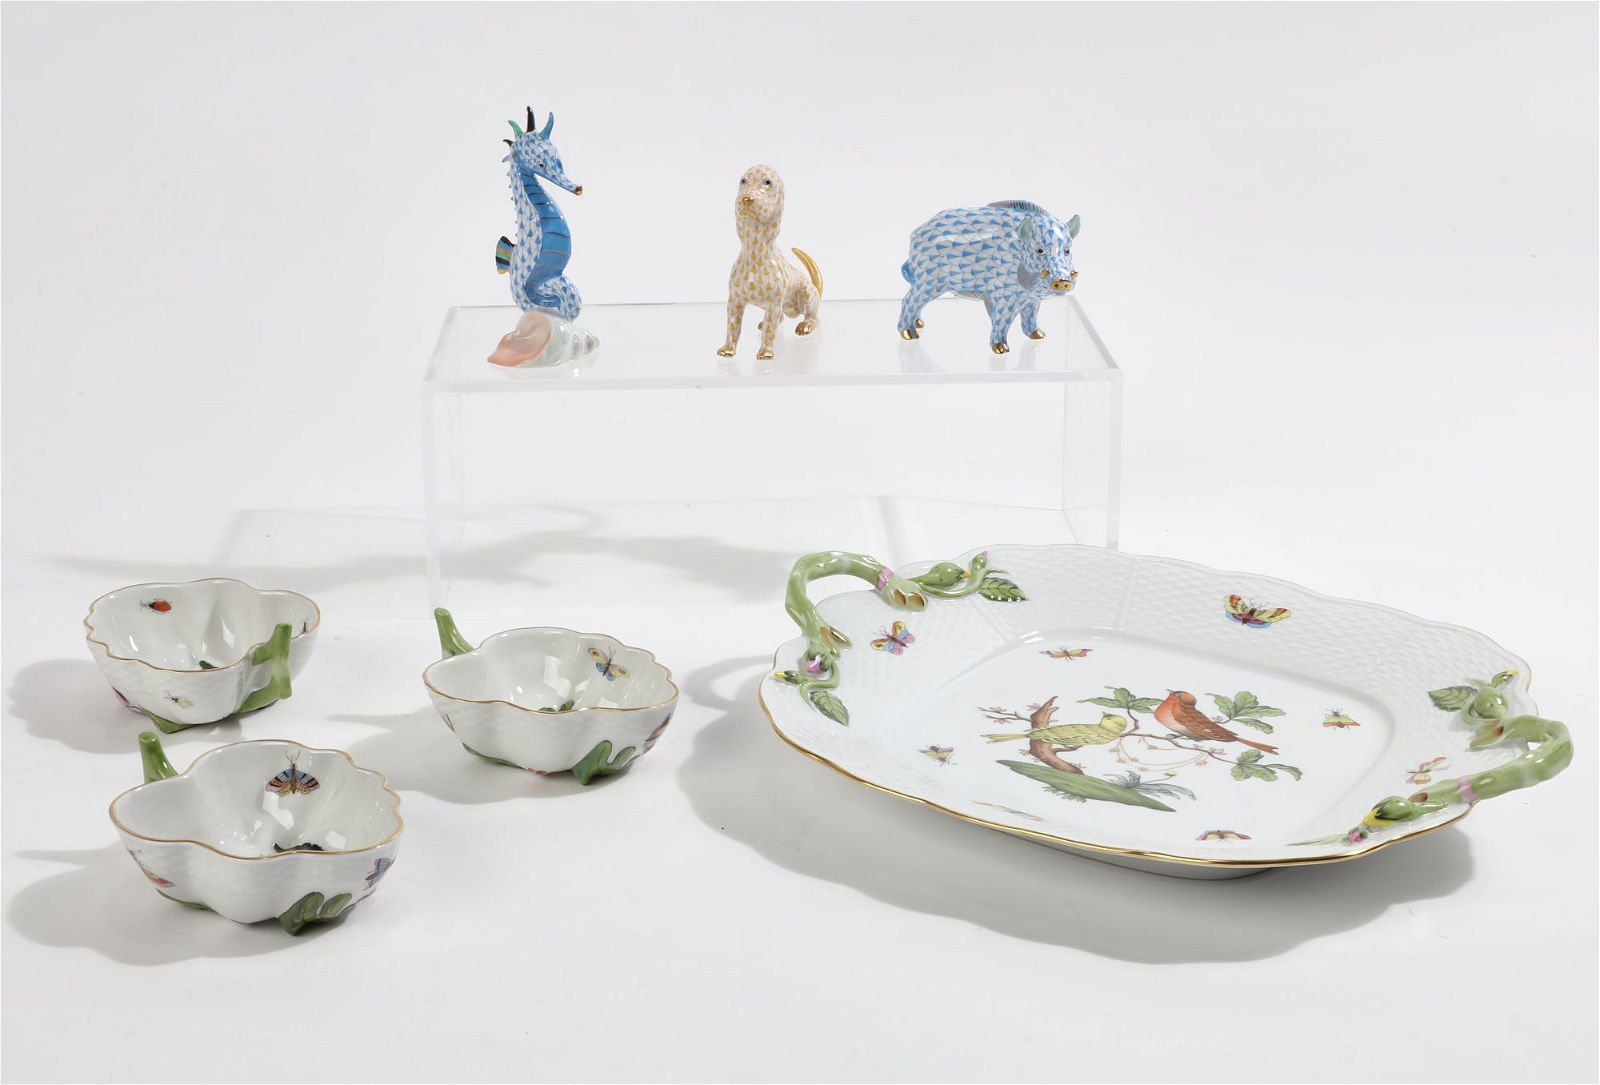 A GROUP OF HEREND PORCELAIN ARTICLESA 2fb373e